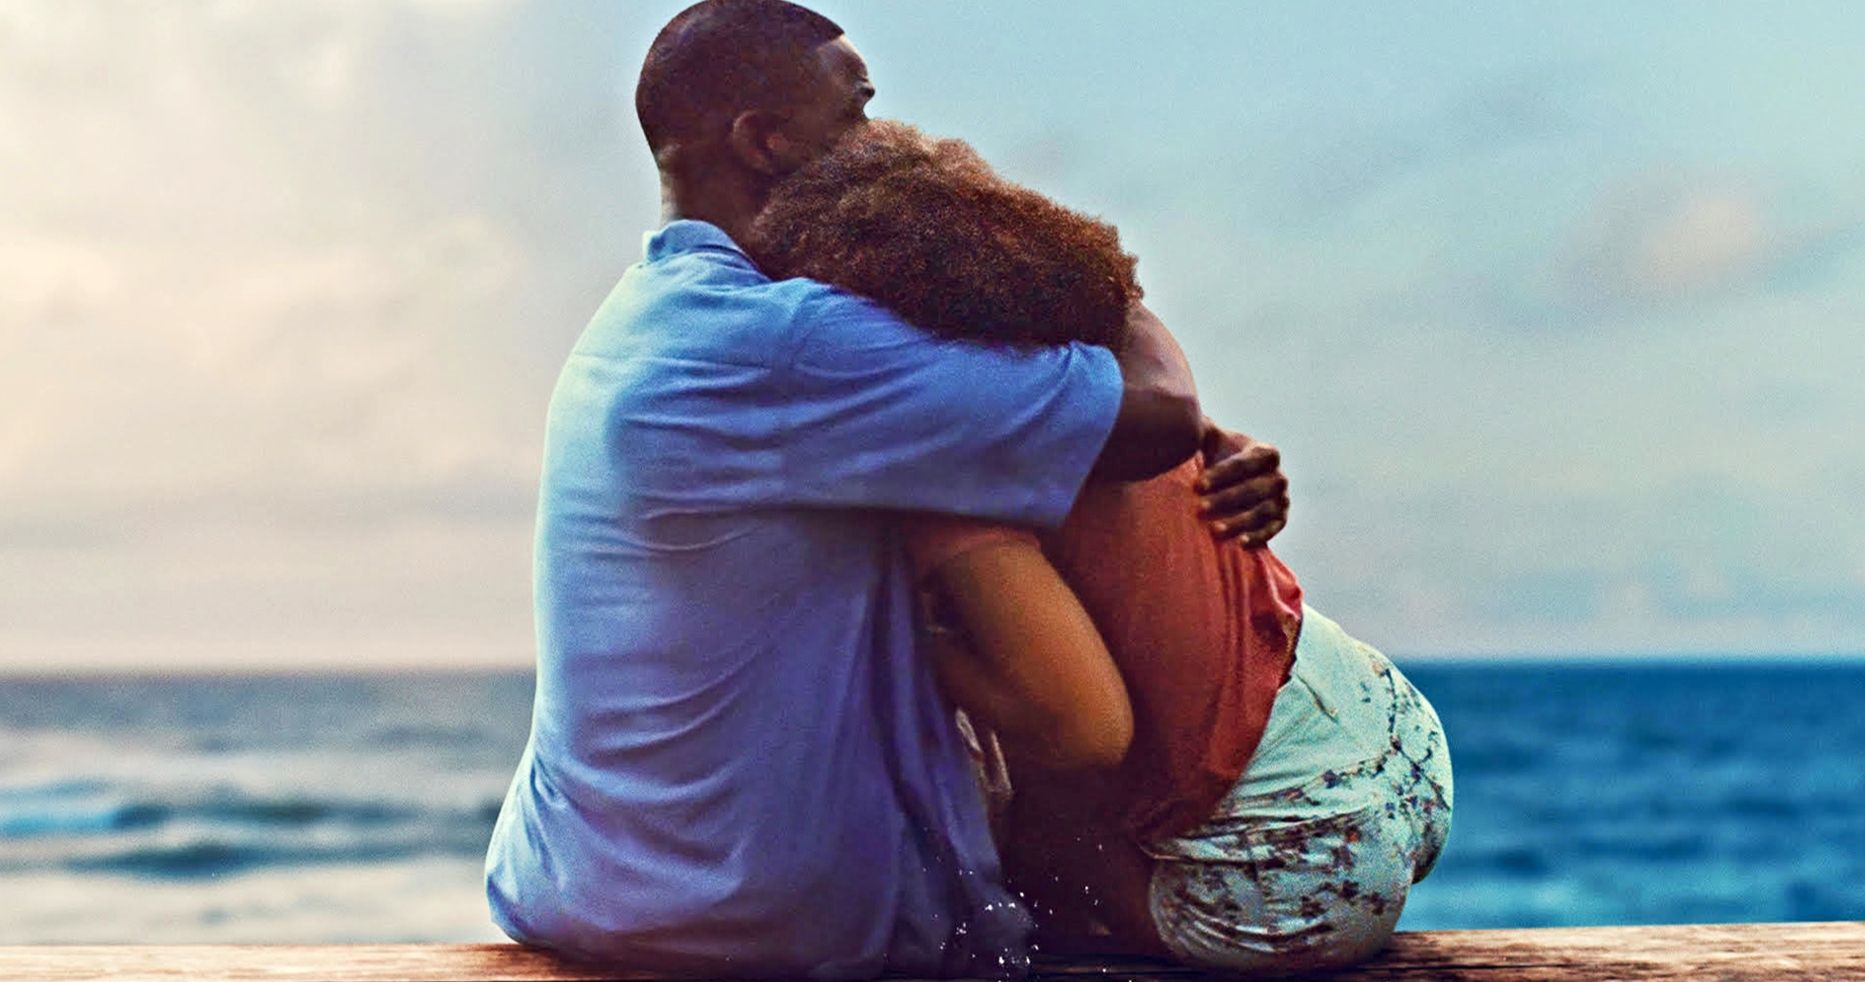 Waves Review: An Emotional and Powerful Family Portrait